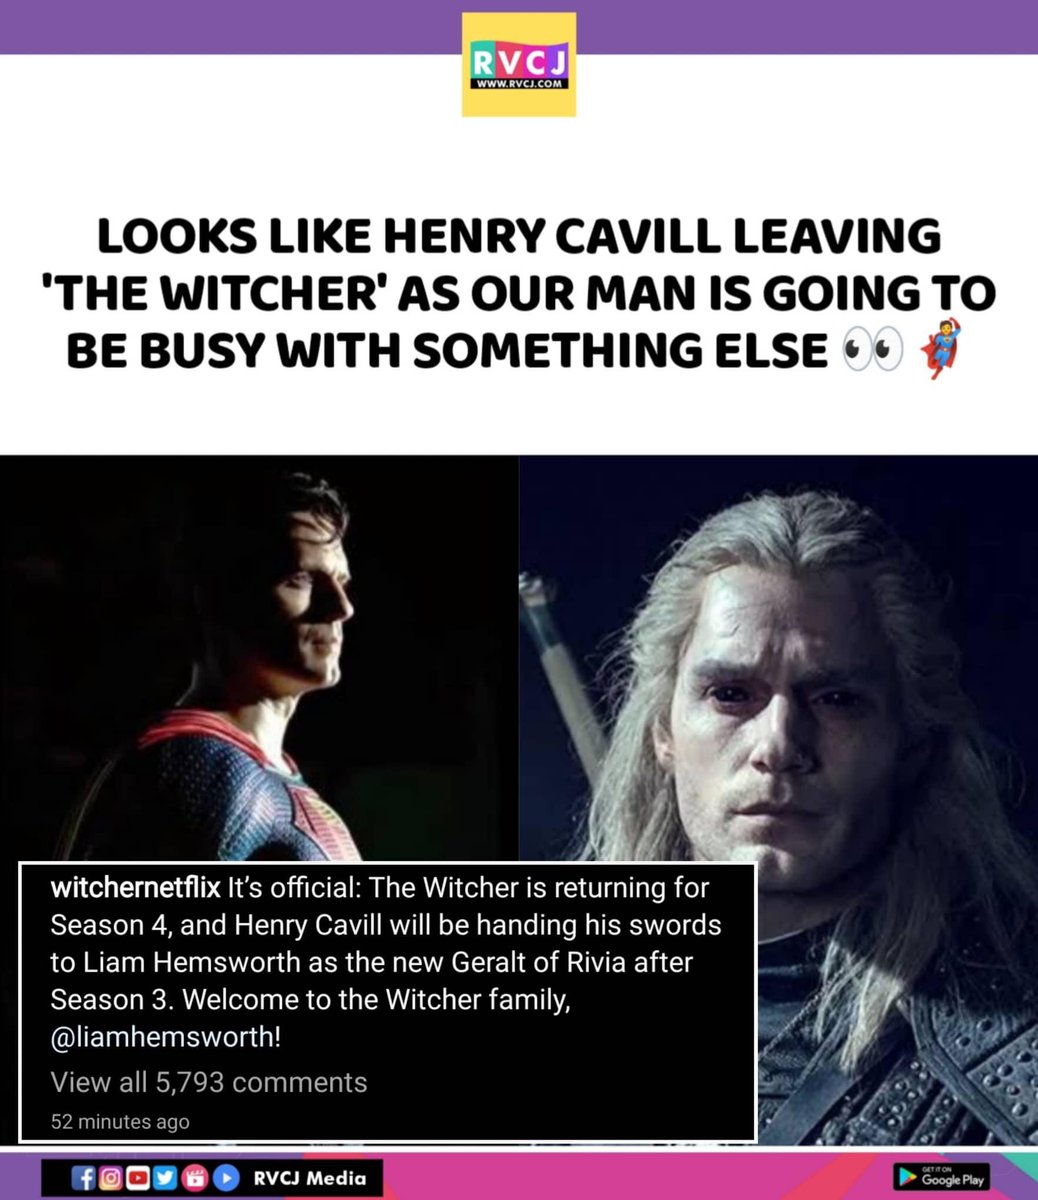 Meanwhile.. #thewitcher #henrycavill #liamhemsworth #series #tvseries #rvcjmovies